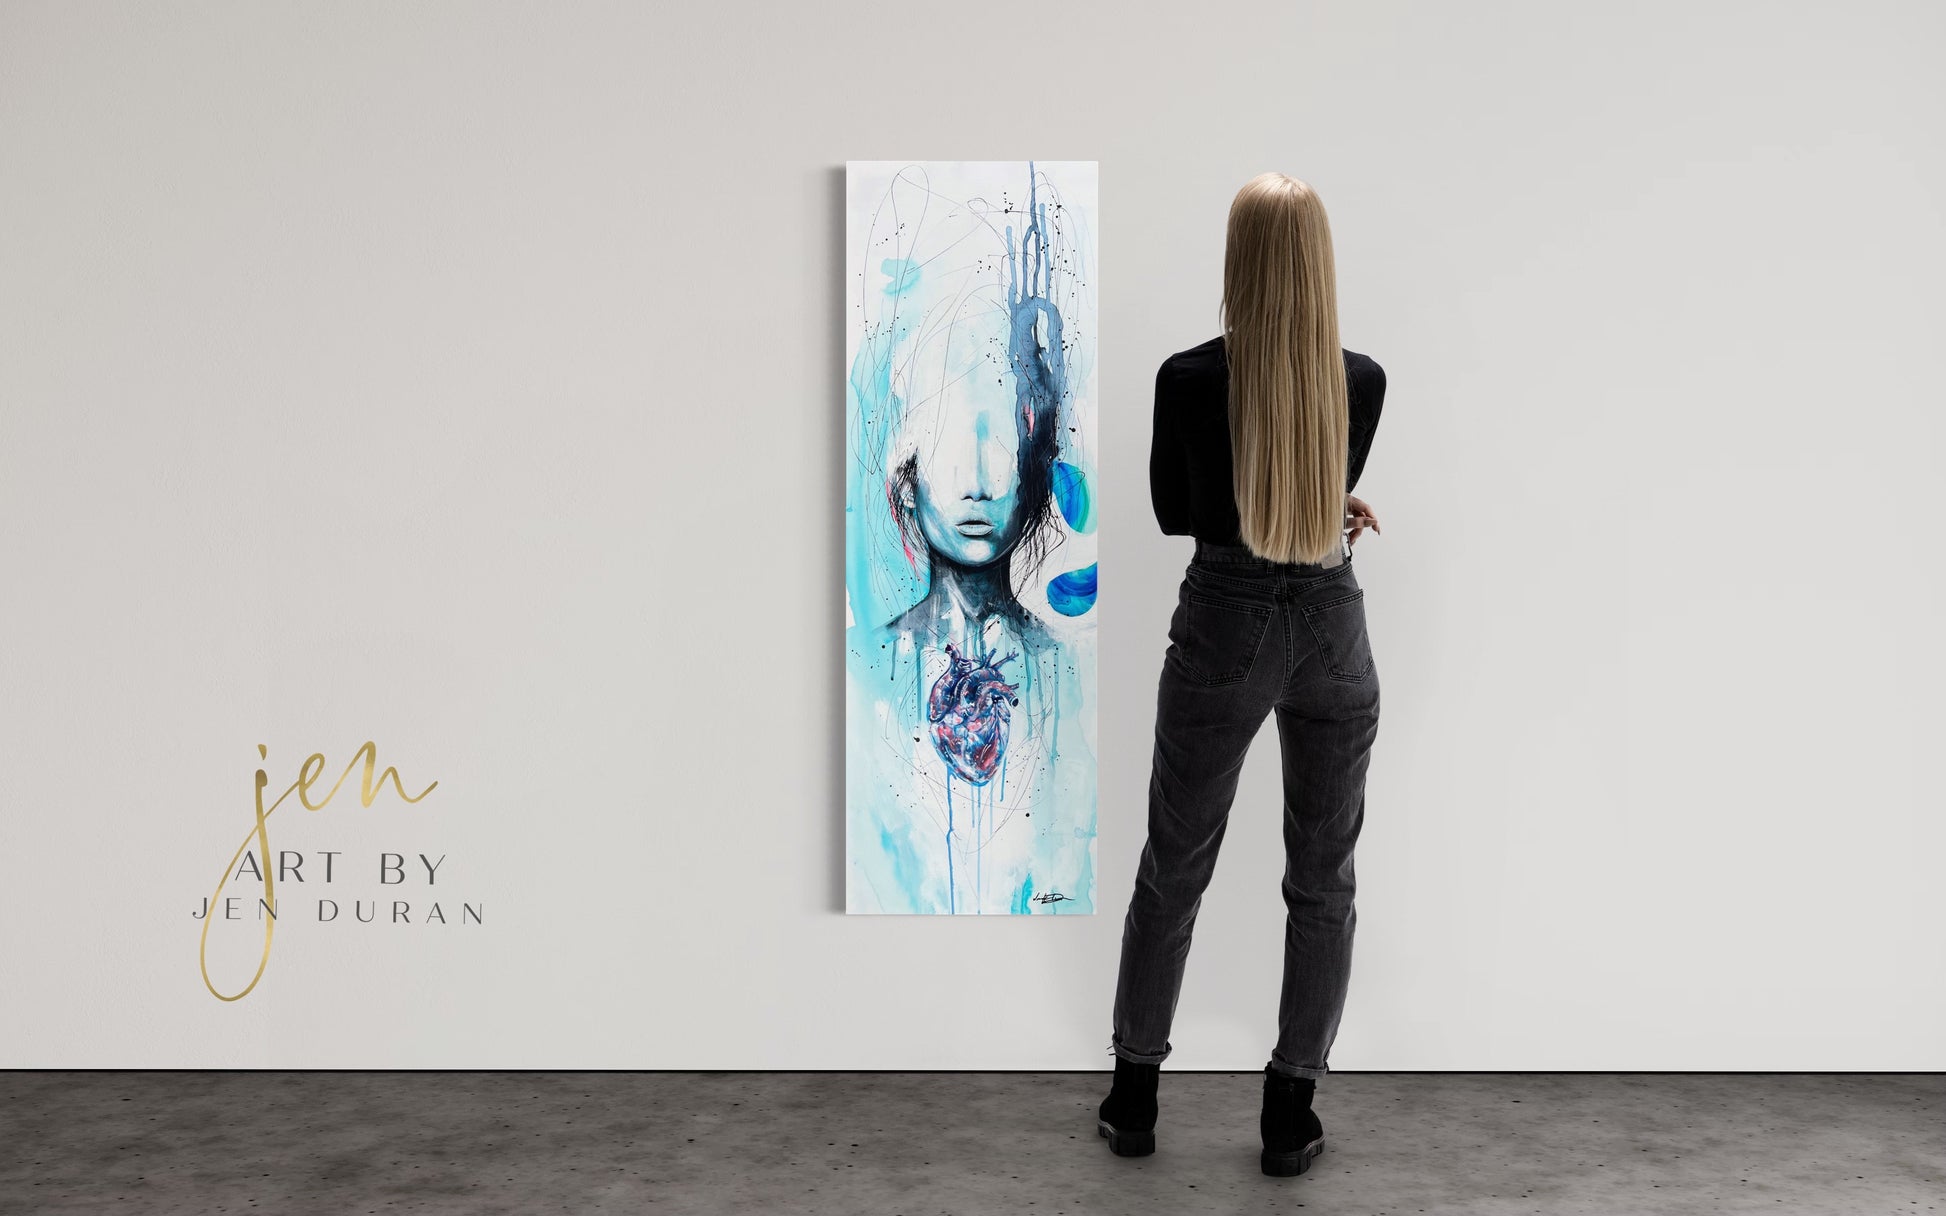 "SET FREE" Original Watercolor and Mixed Media Painting | Canvas Wall Art | Home Decor | Art By Jen DuranAbstract Modern Portrait Figure Heart Watercolor Canvas Wall Art Painting by Jen Duran